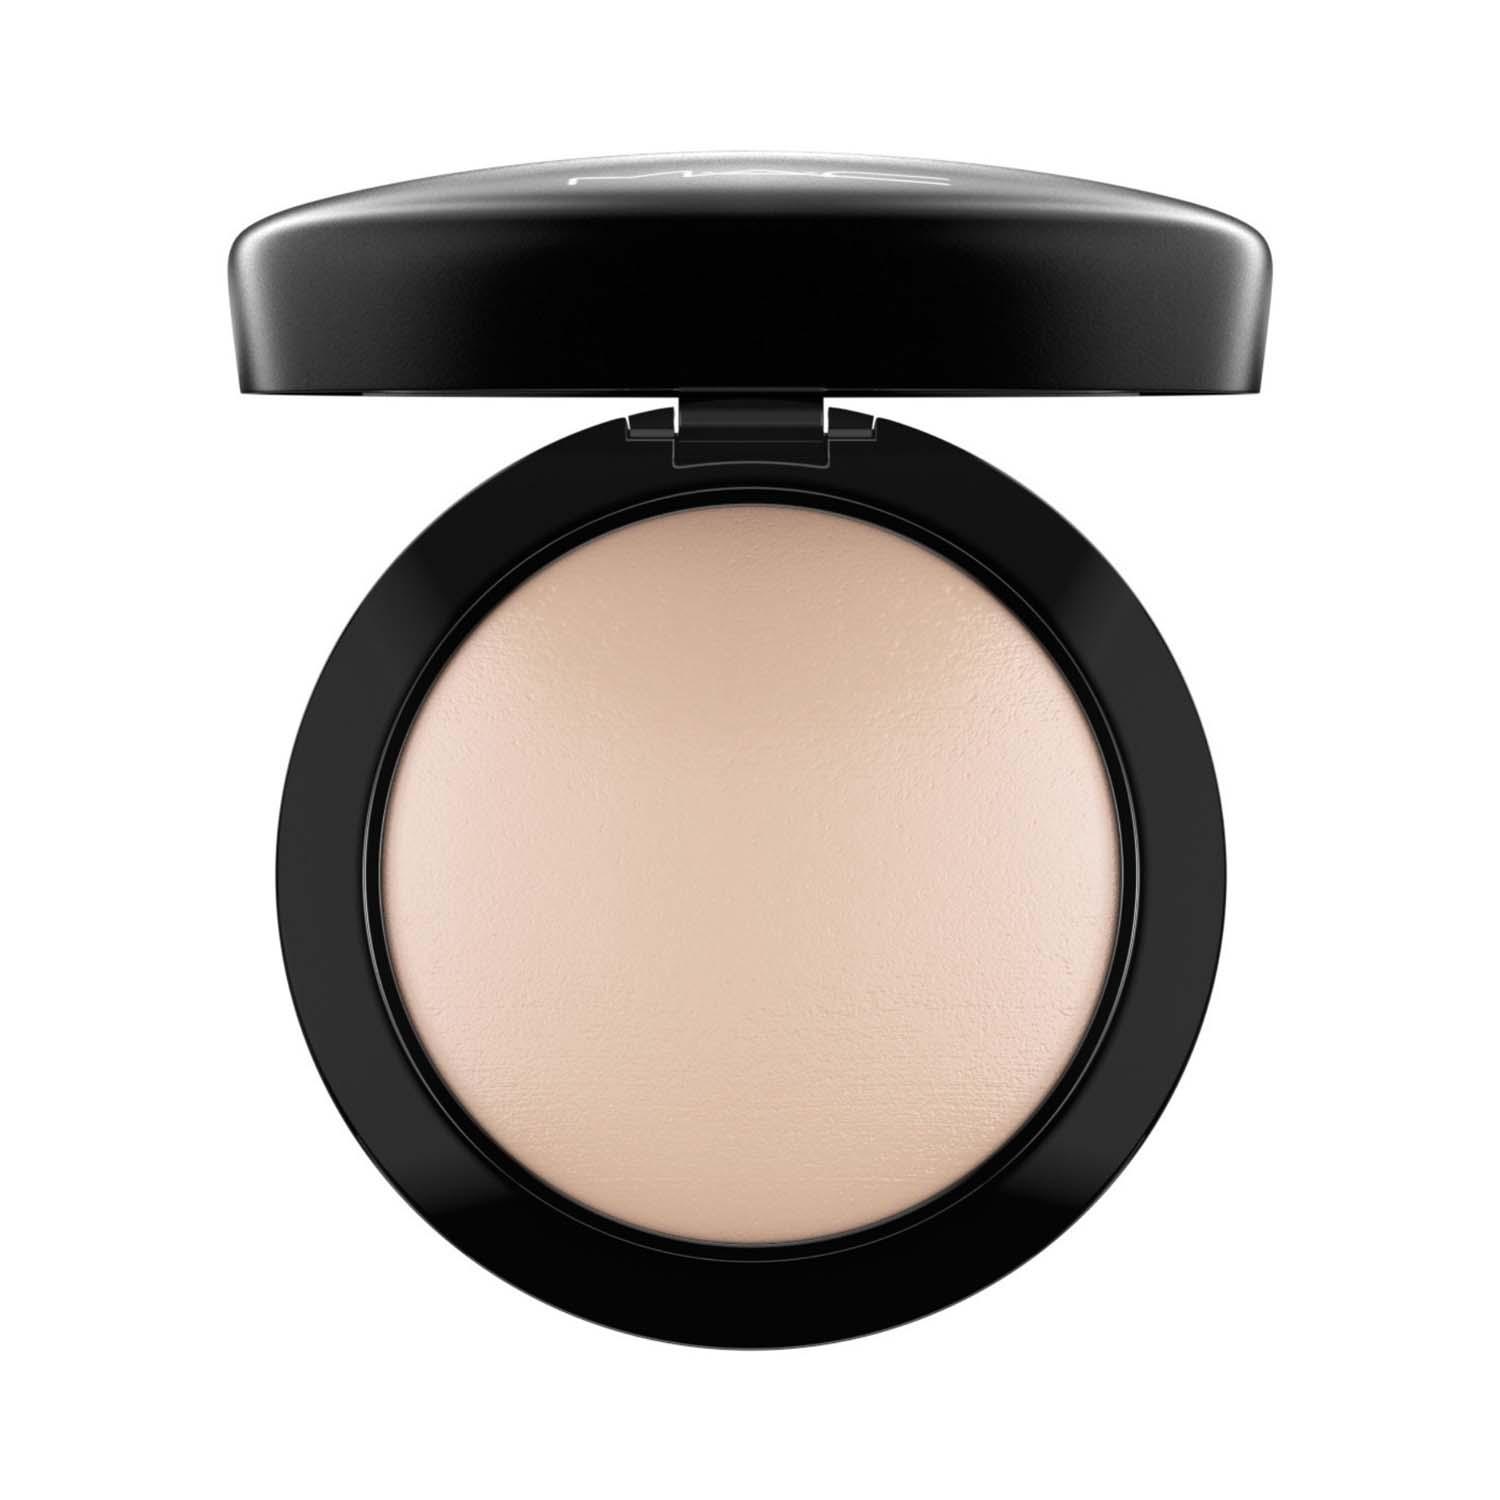 M.A.C | M.A.C Mineralize Skinfinish Natural - Light (10g)